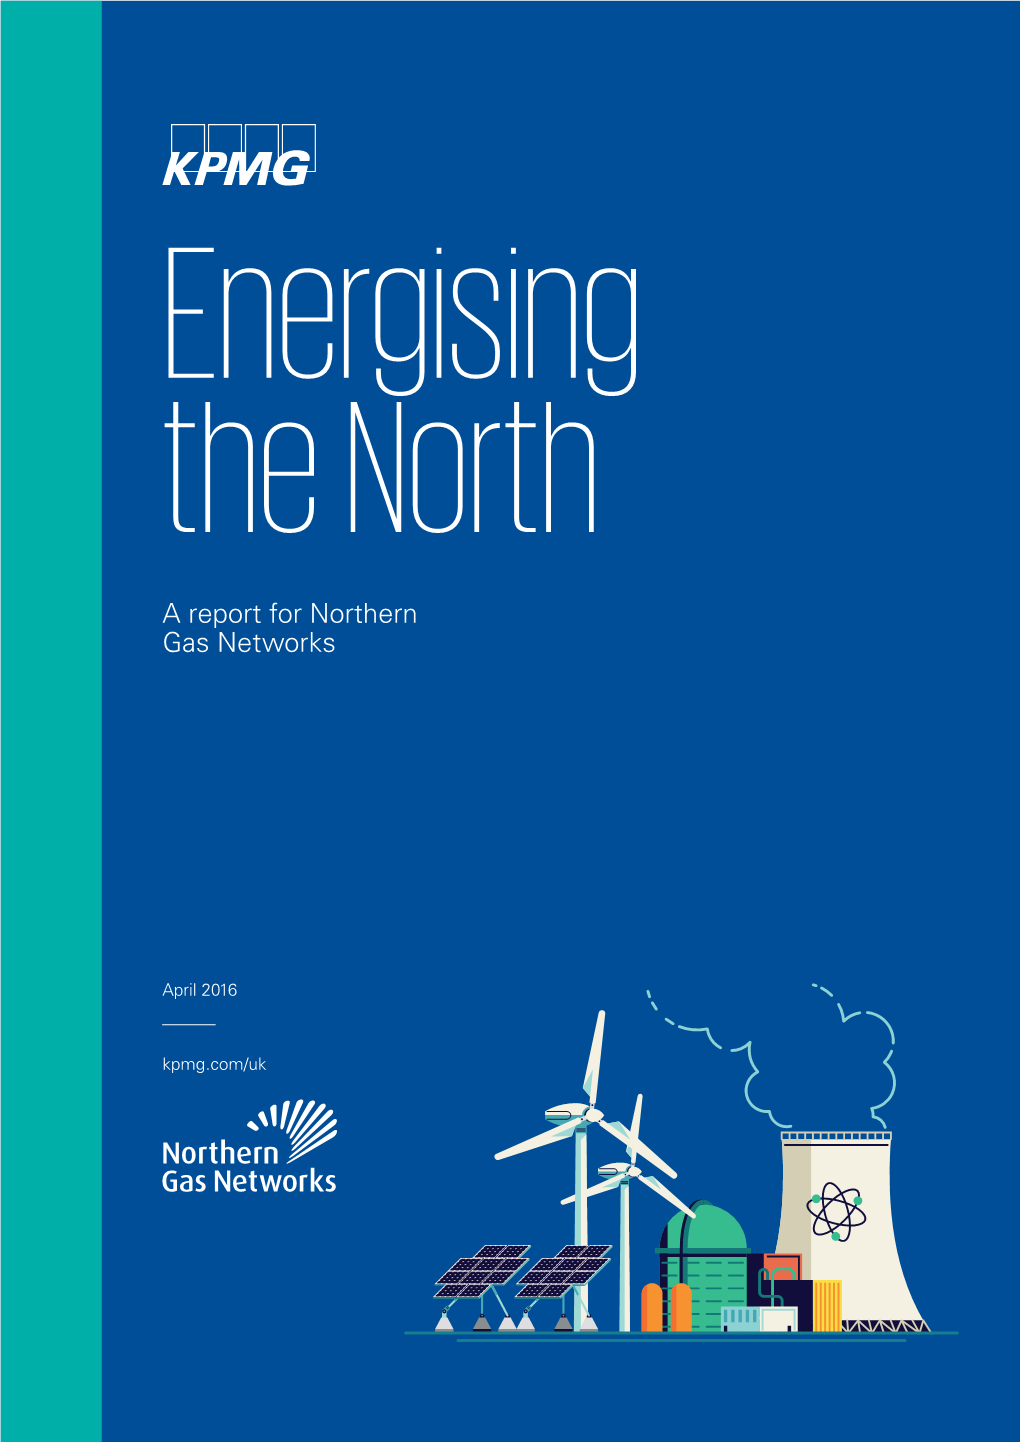 A Report for Northern Gas Networks